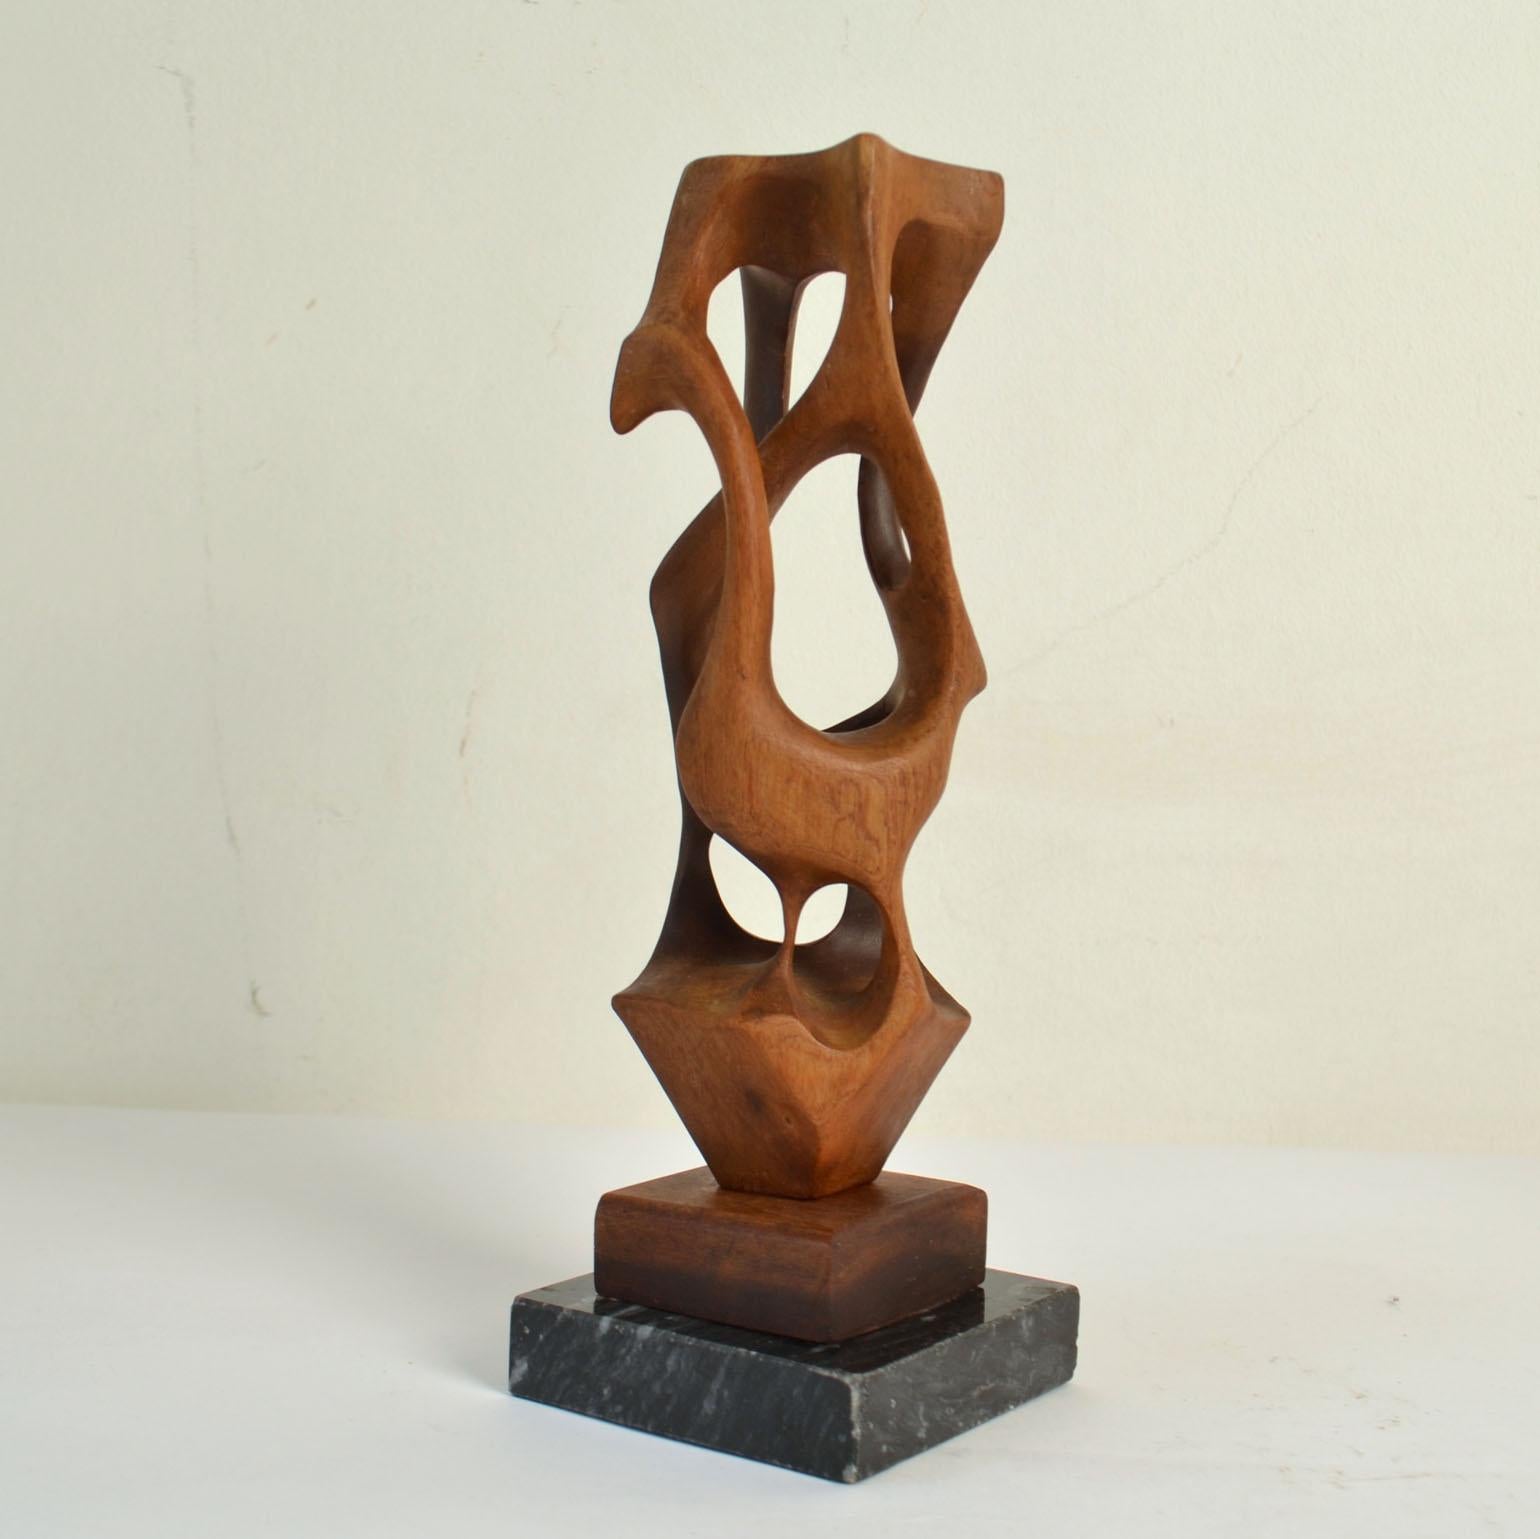 Hand Carved Biomorphic Wooden Sculptures 1